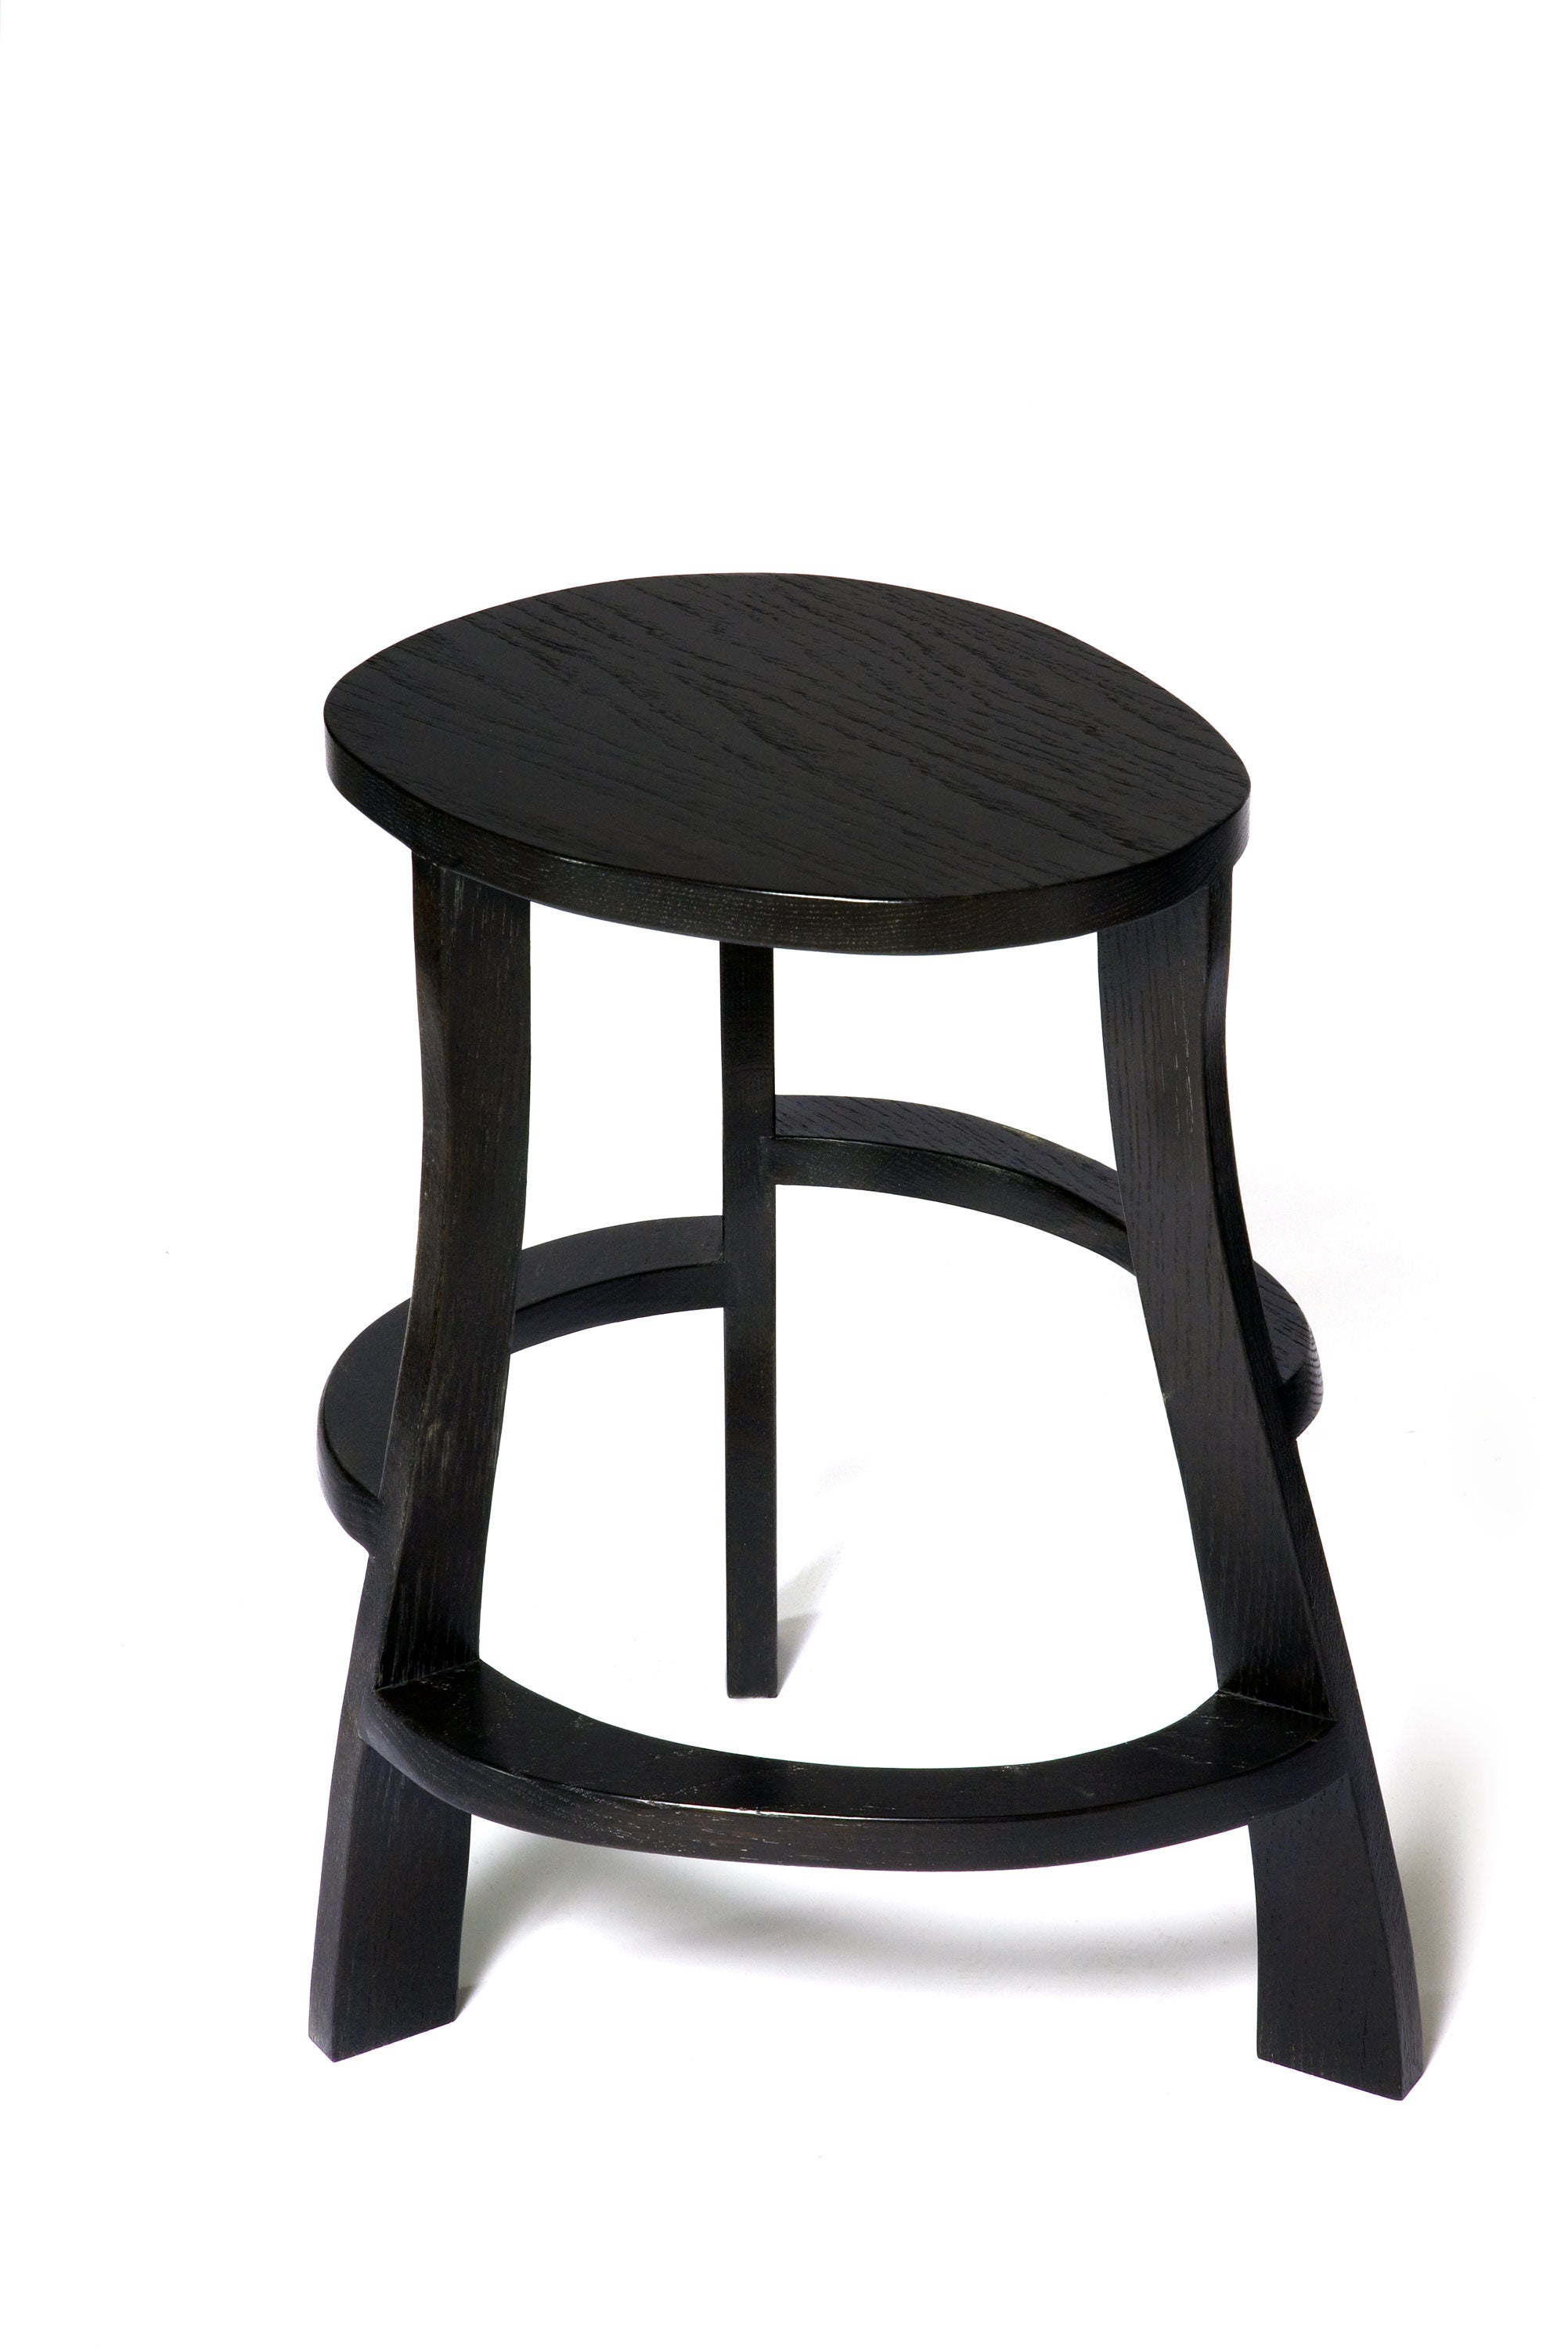 Hand Sculpted stool or table by Jacques Jarrige  For Sale